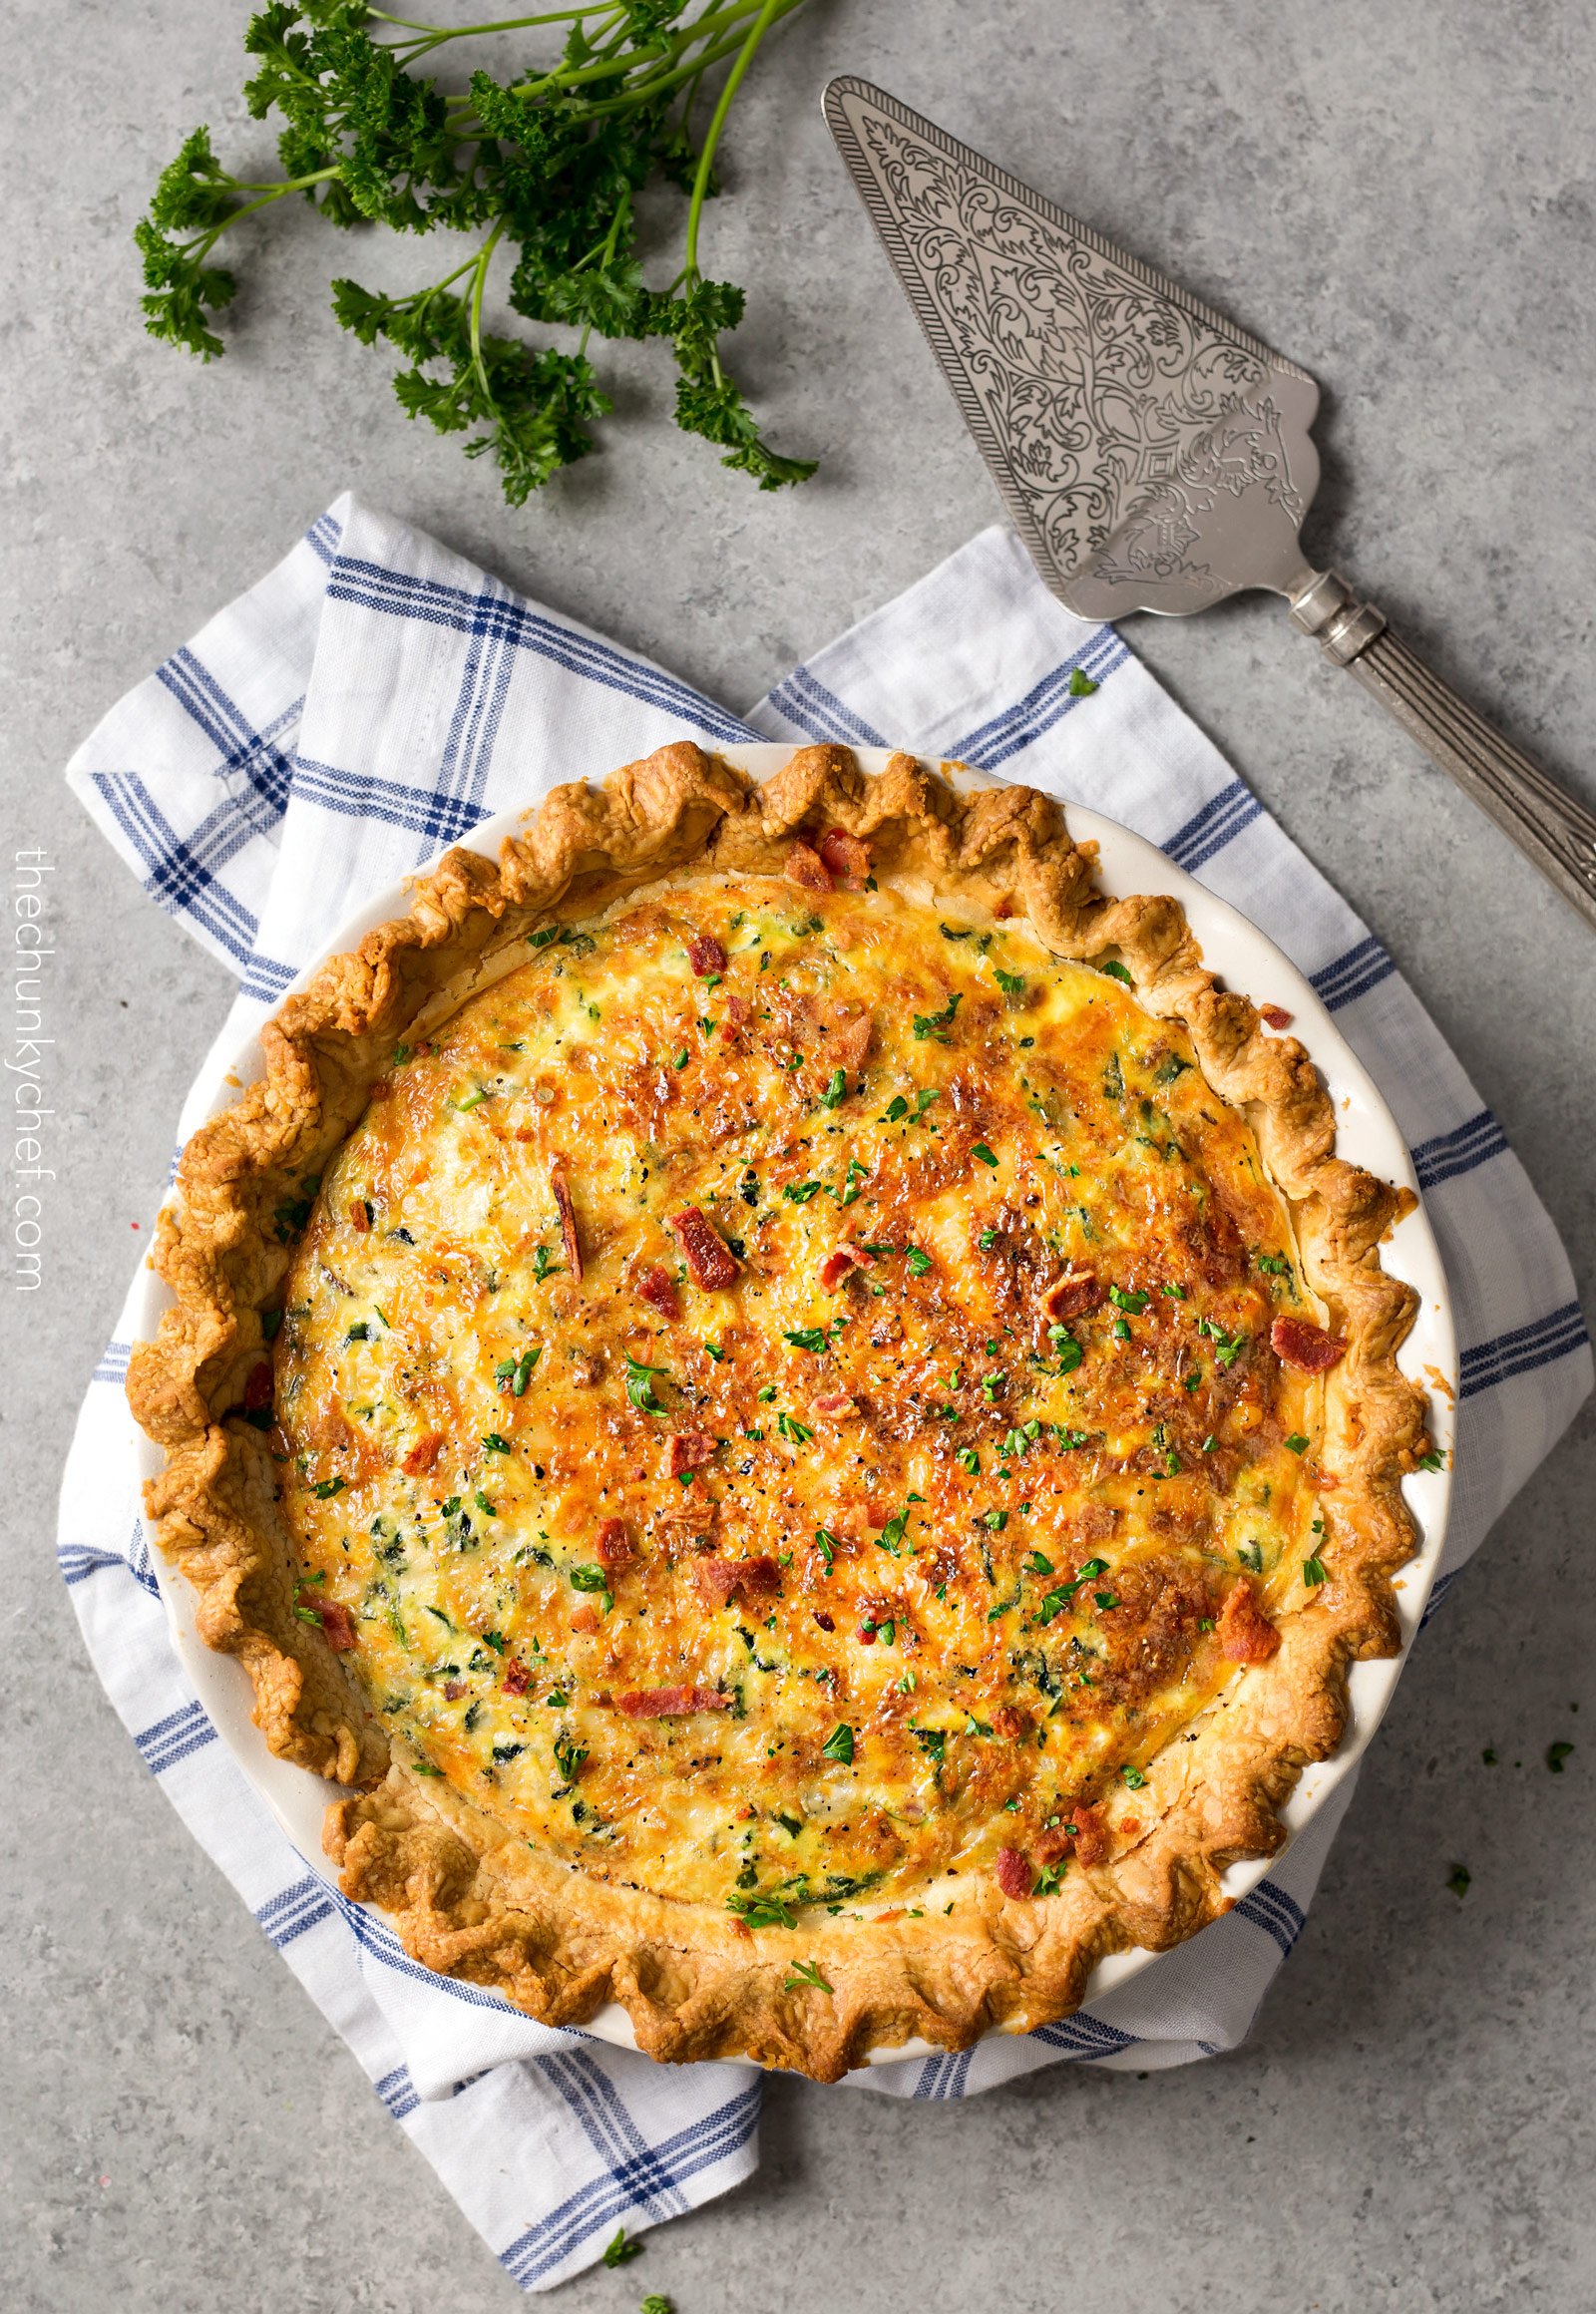 Basic Cheesy Spinach Quiche with Bacon - The Chunky Chef